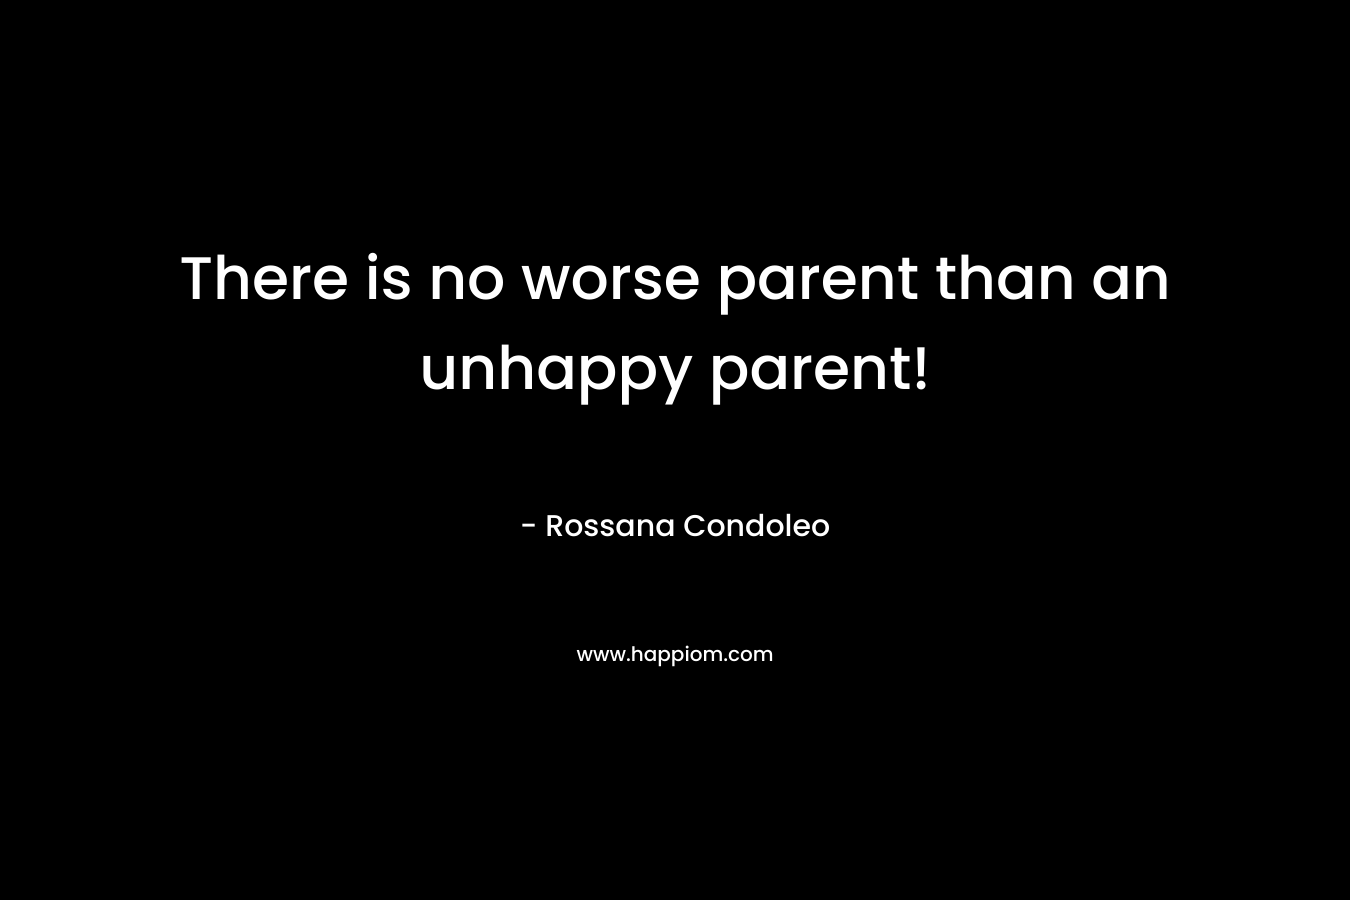 There is no worse parent than an unhappy parent!